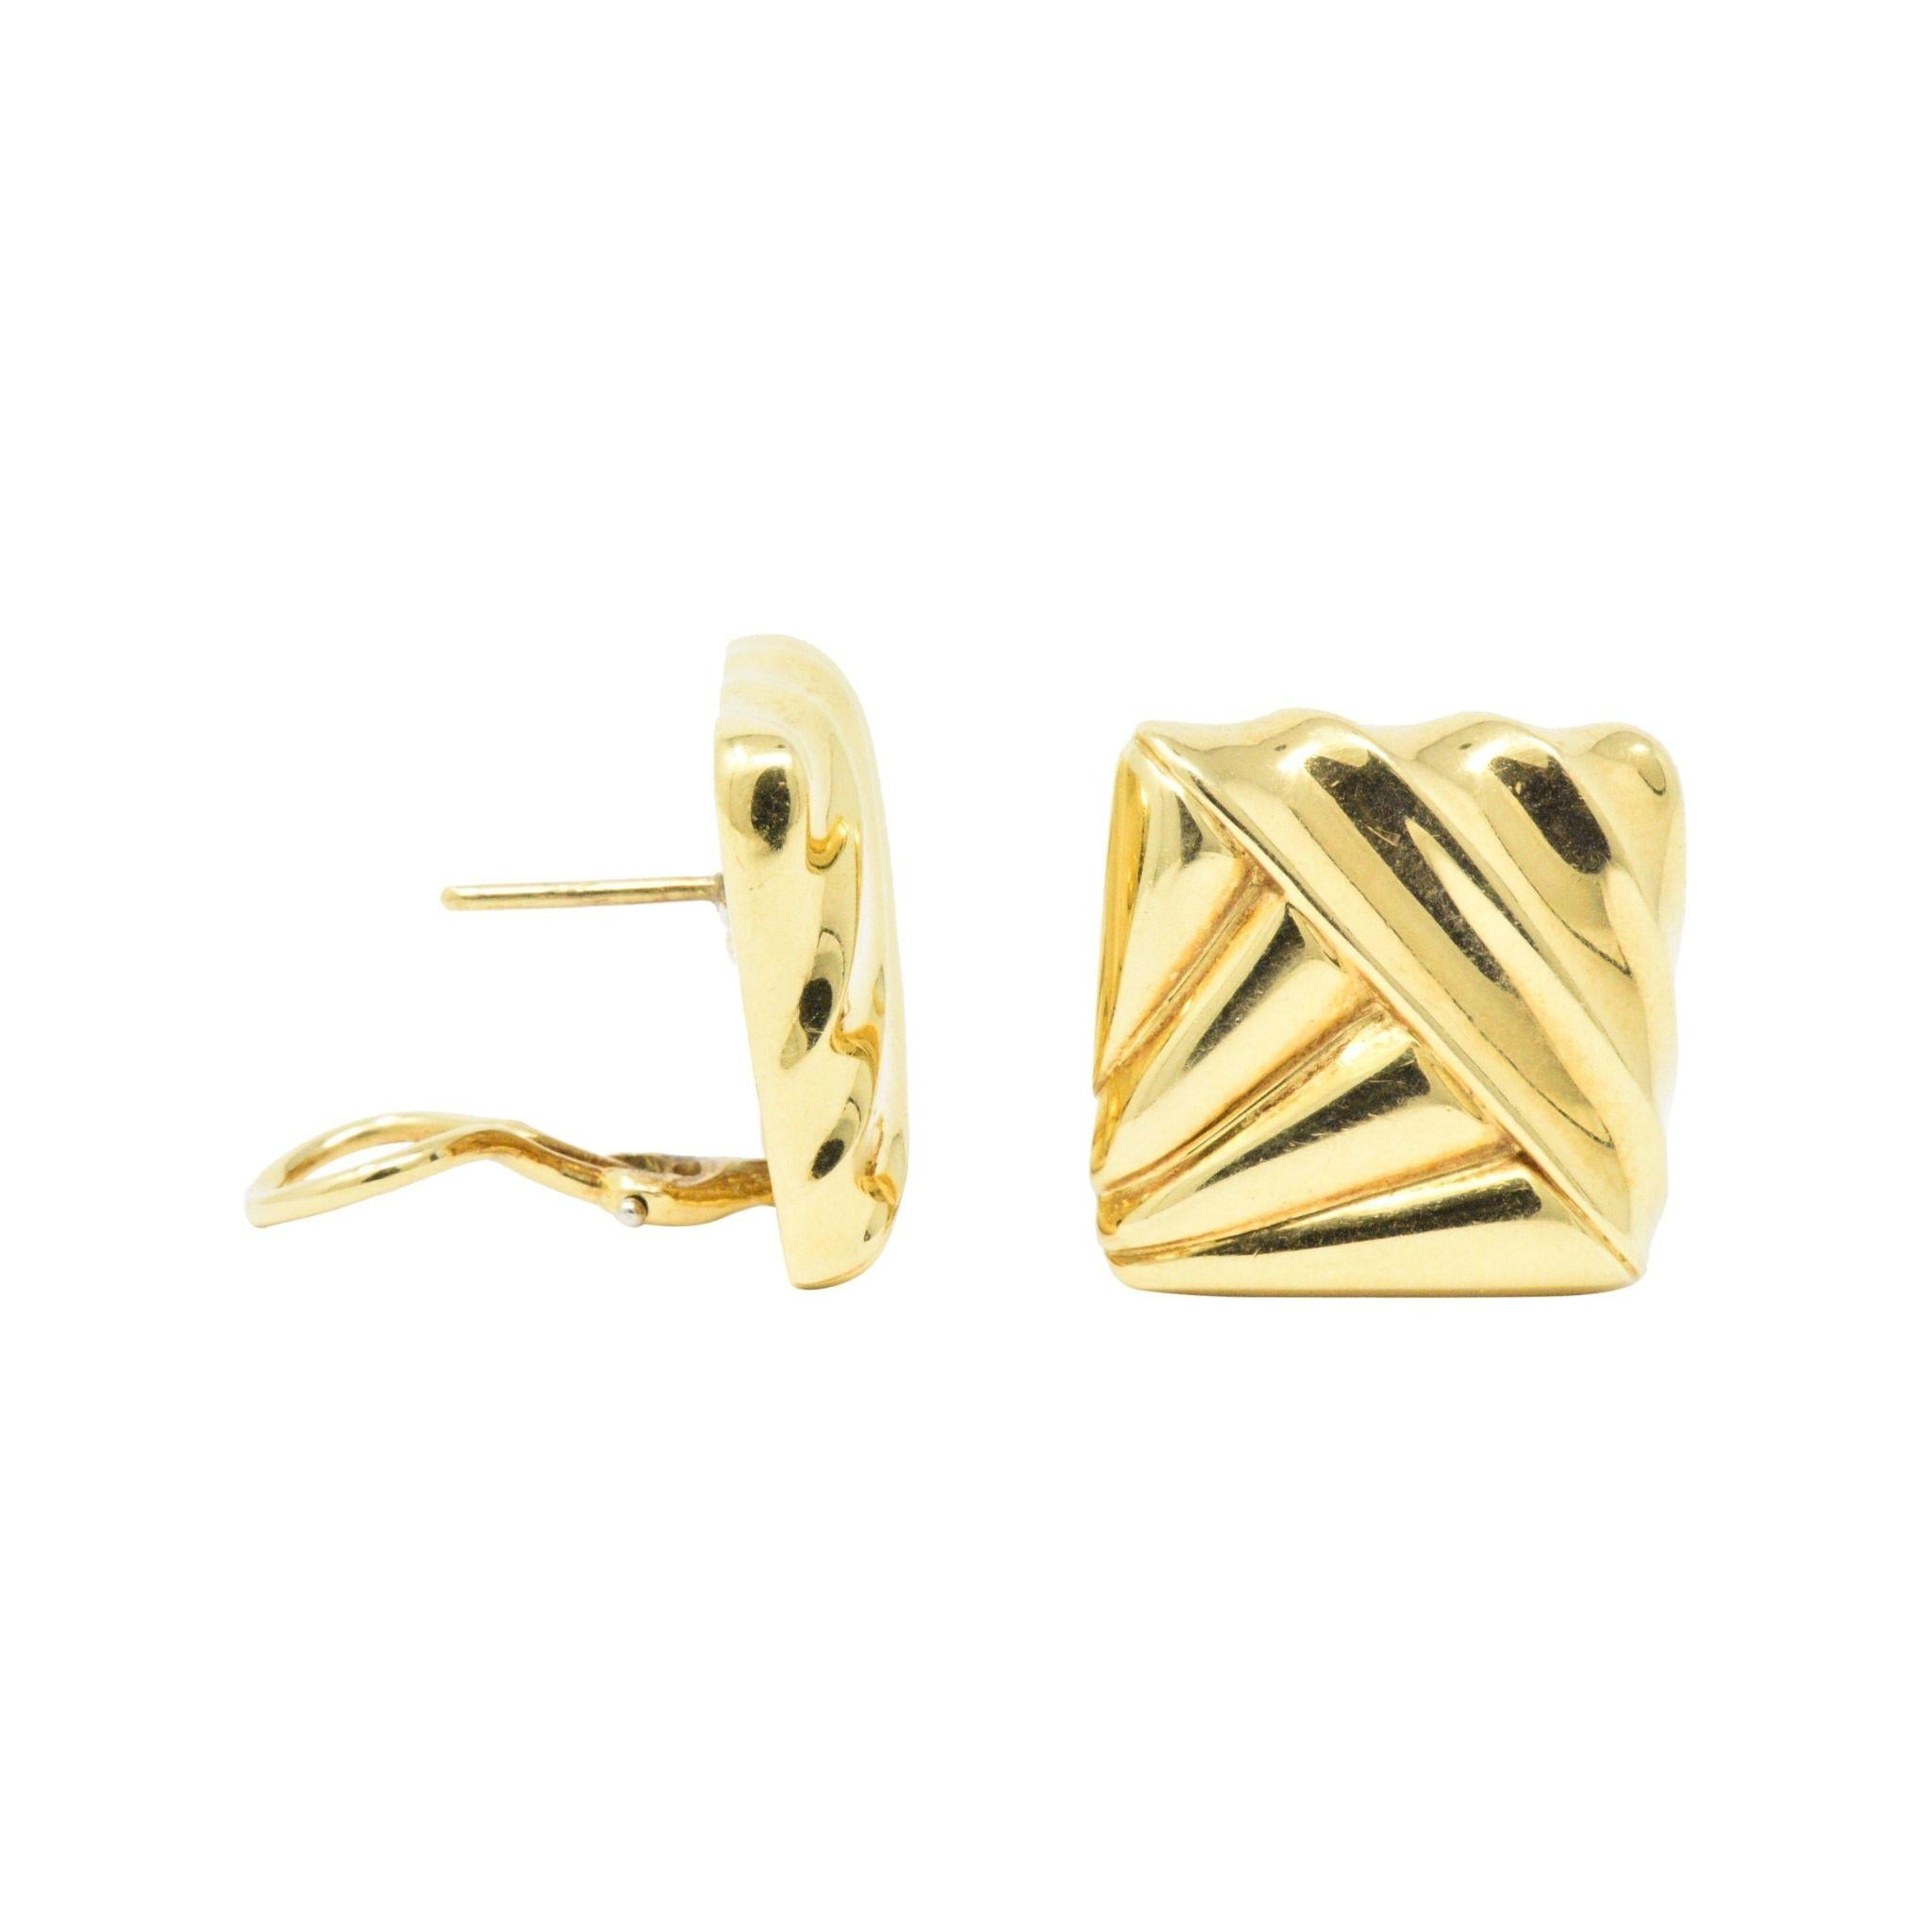 Cartier 18K Yellow Gold Earring Circa 1970
High polished fluted gold, with a geometric motif
Measuring: 19.75 mm x 19.77 mm
Post and omega backs
Fully Signed Cartier
Total Weight: 16.6 Grams
Clean. Classic. Cartier.
 

 

Stock Number: WE- 788